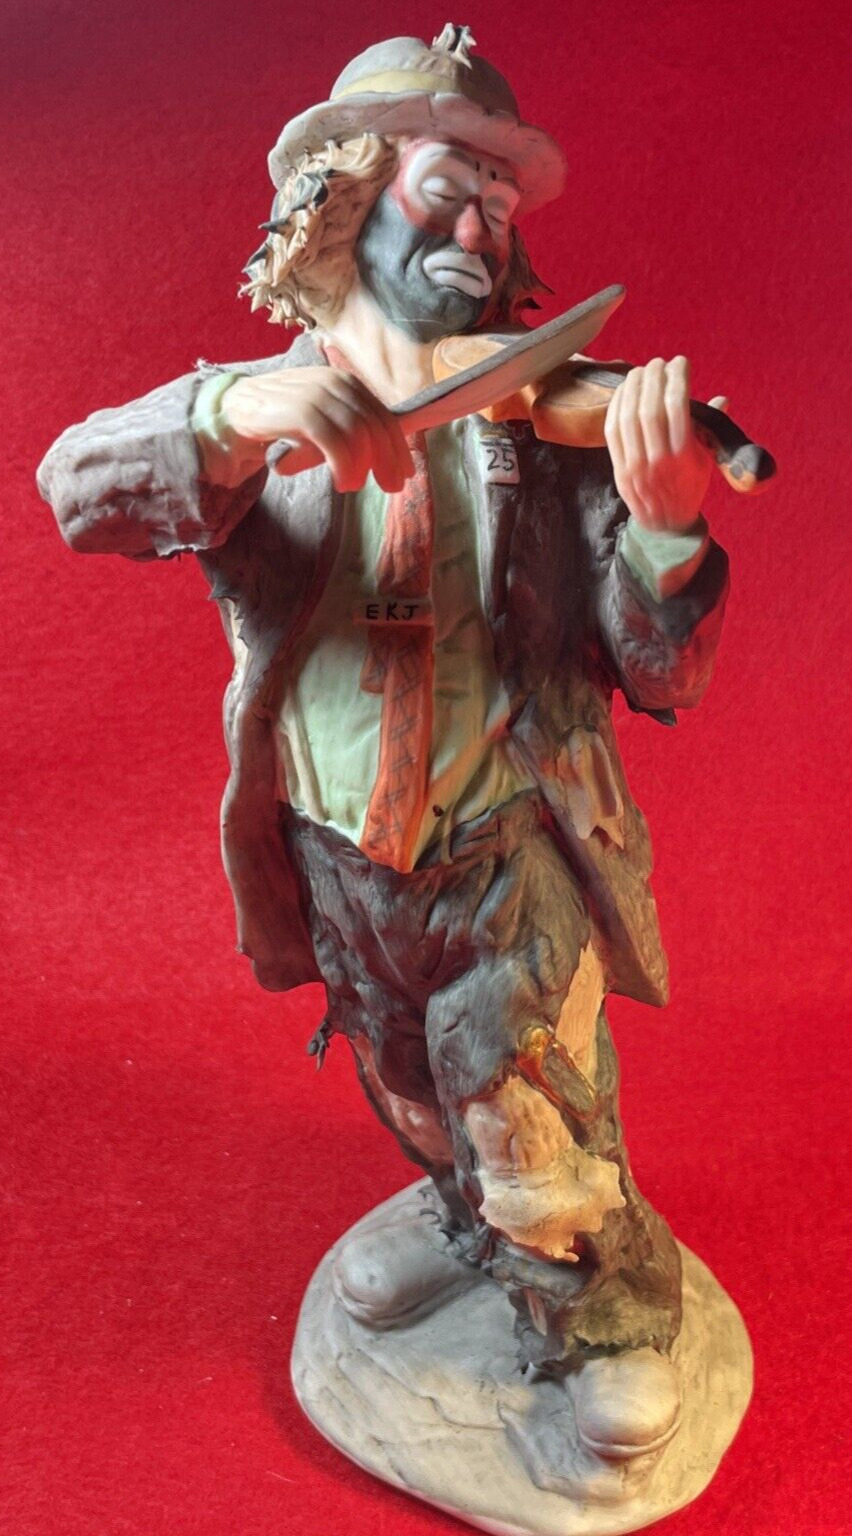 Rare Emmett Kelly  Porcelain  Clown Playing Violin, Limited Edition 4142 of 9500